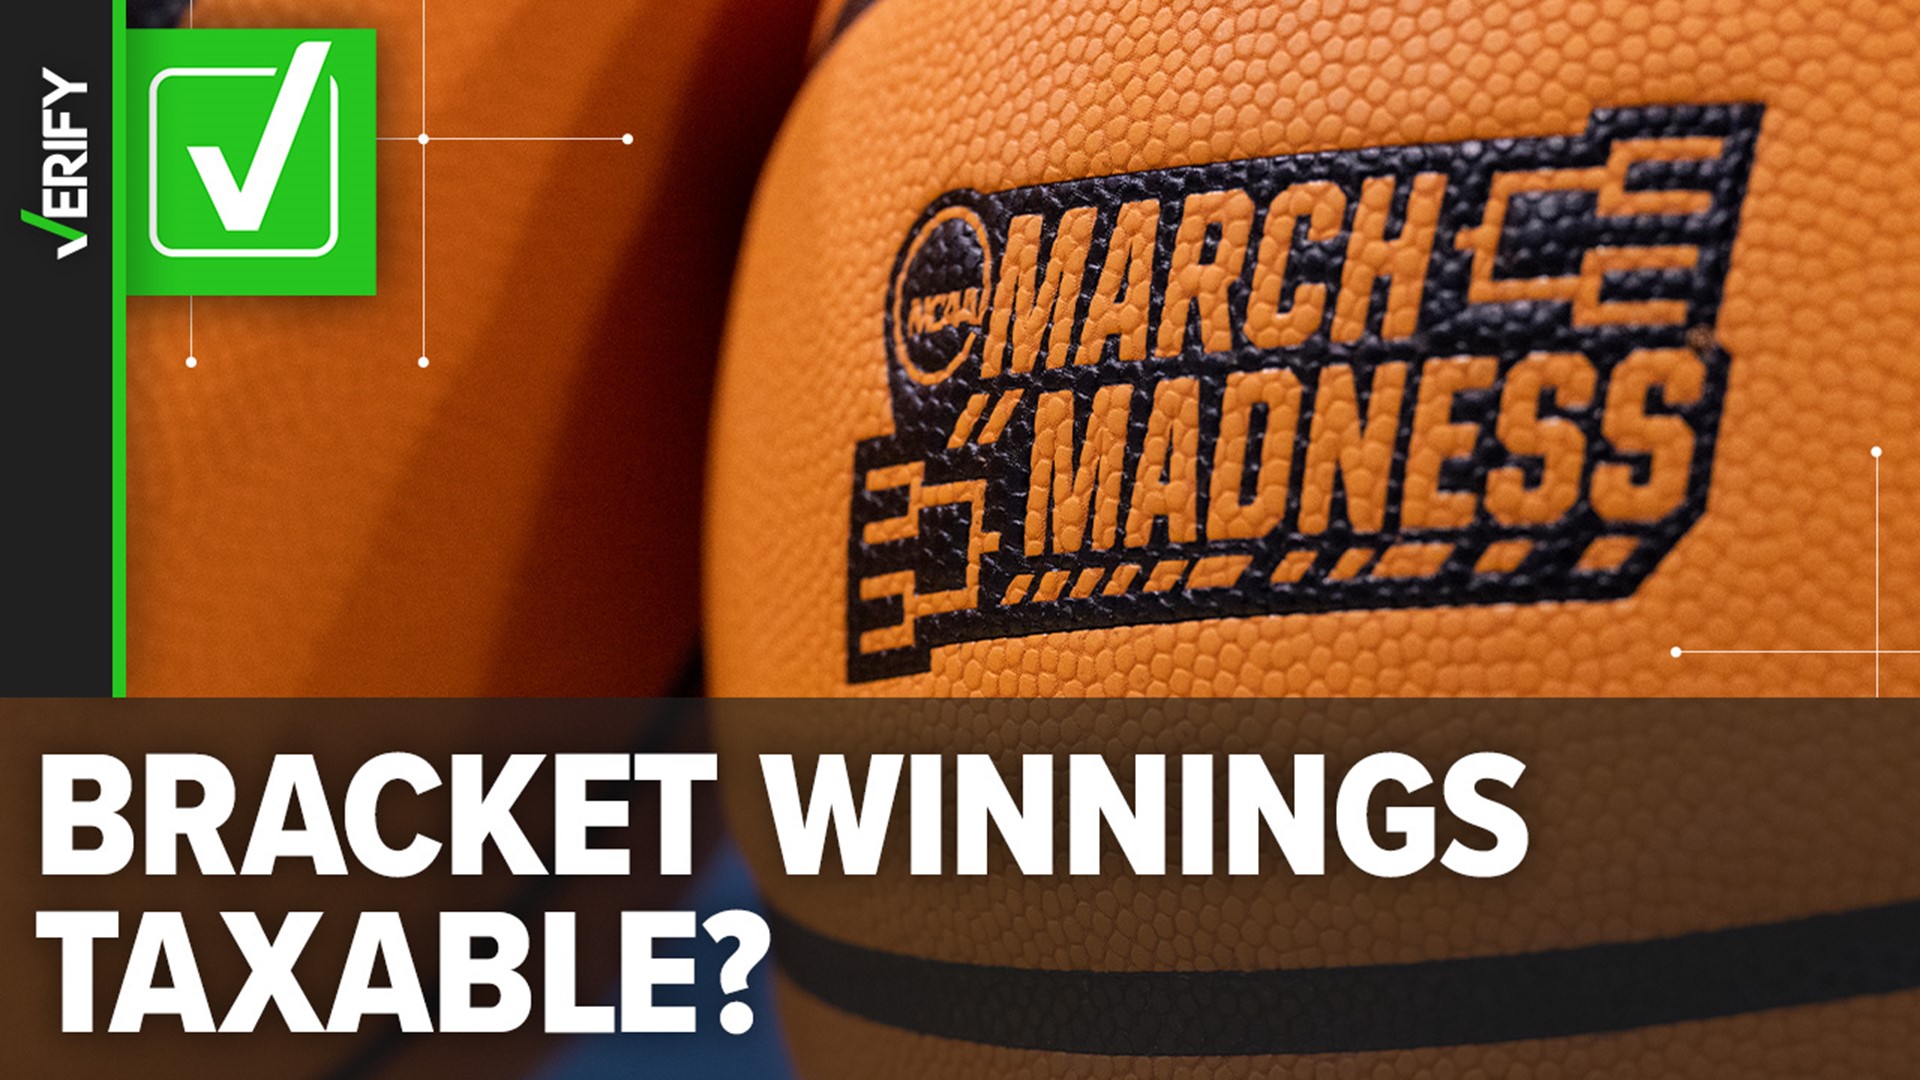 March Madness 2023 bracket winnings are taxable cbs8